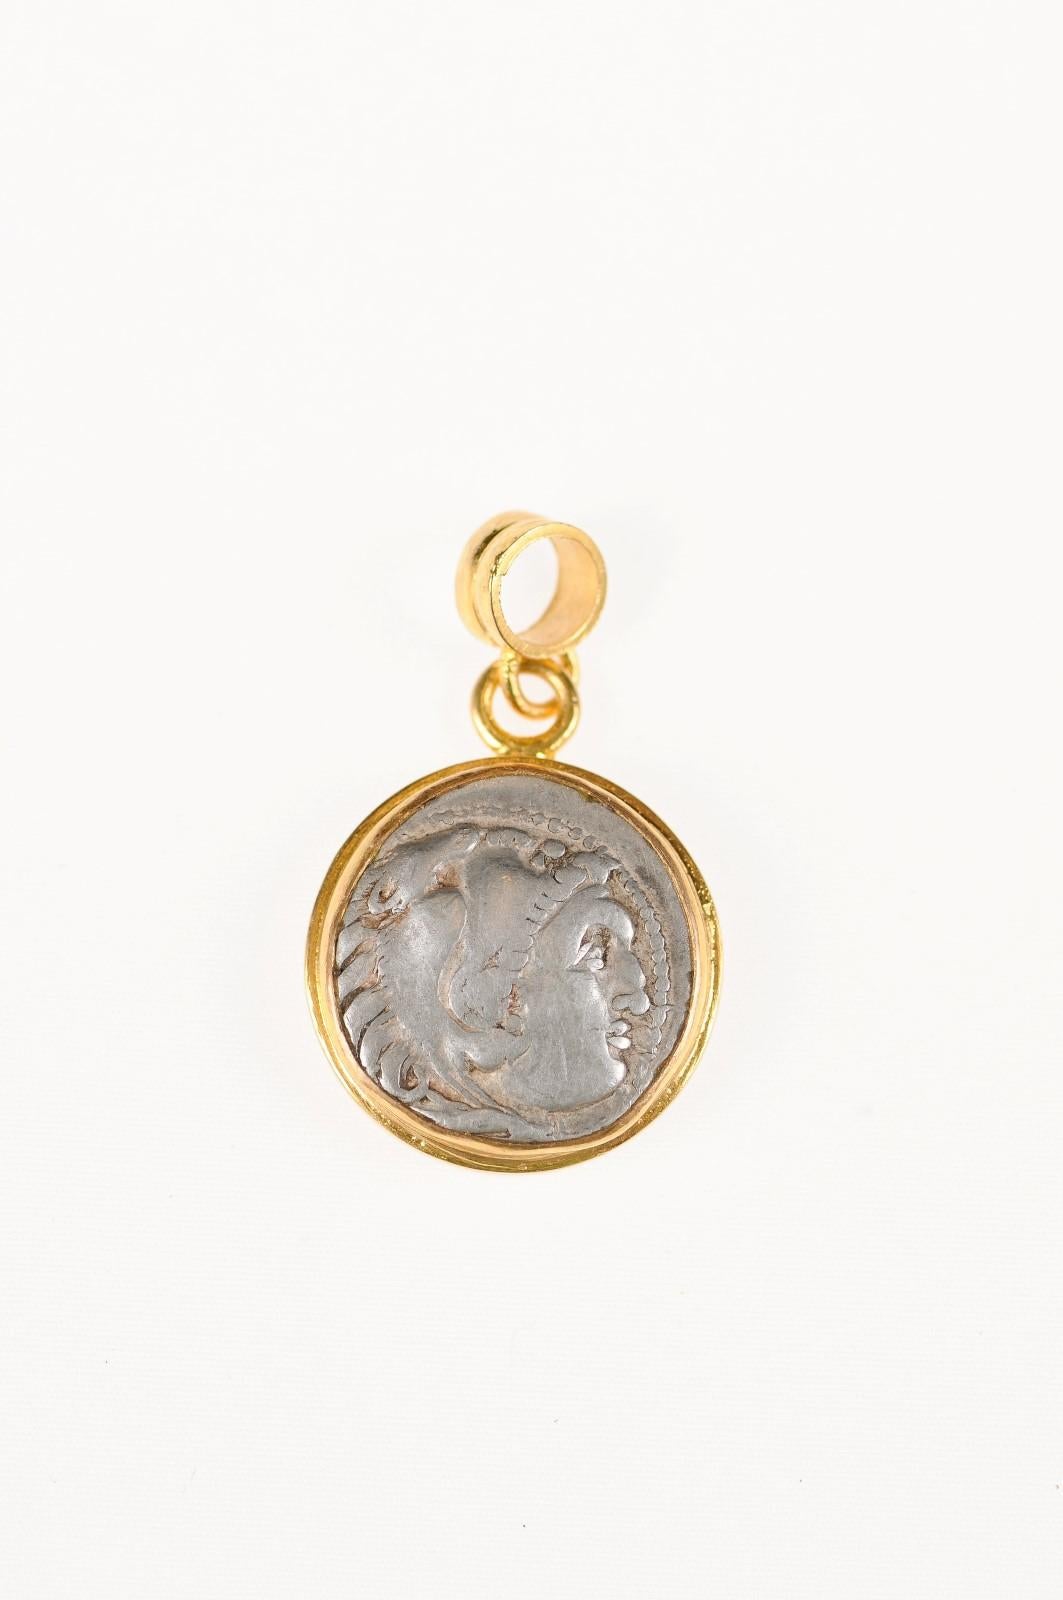 An authentic Greek, Alexander the Great, AR Drachm coin (circa 3rd century BC), set in a round 22k gold bezel with 22k gold bail. The obverse, or front side of this coin features the head of Herakles wearing a lion skin headdress. On the reverse